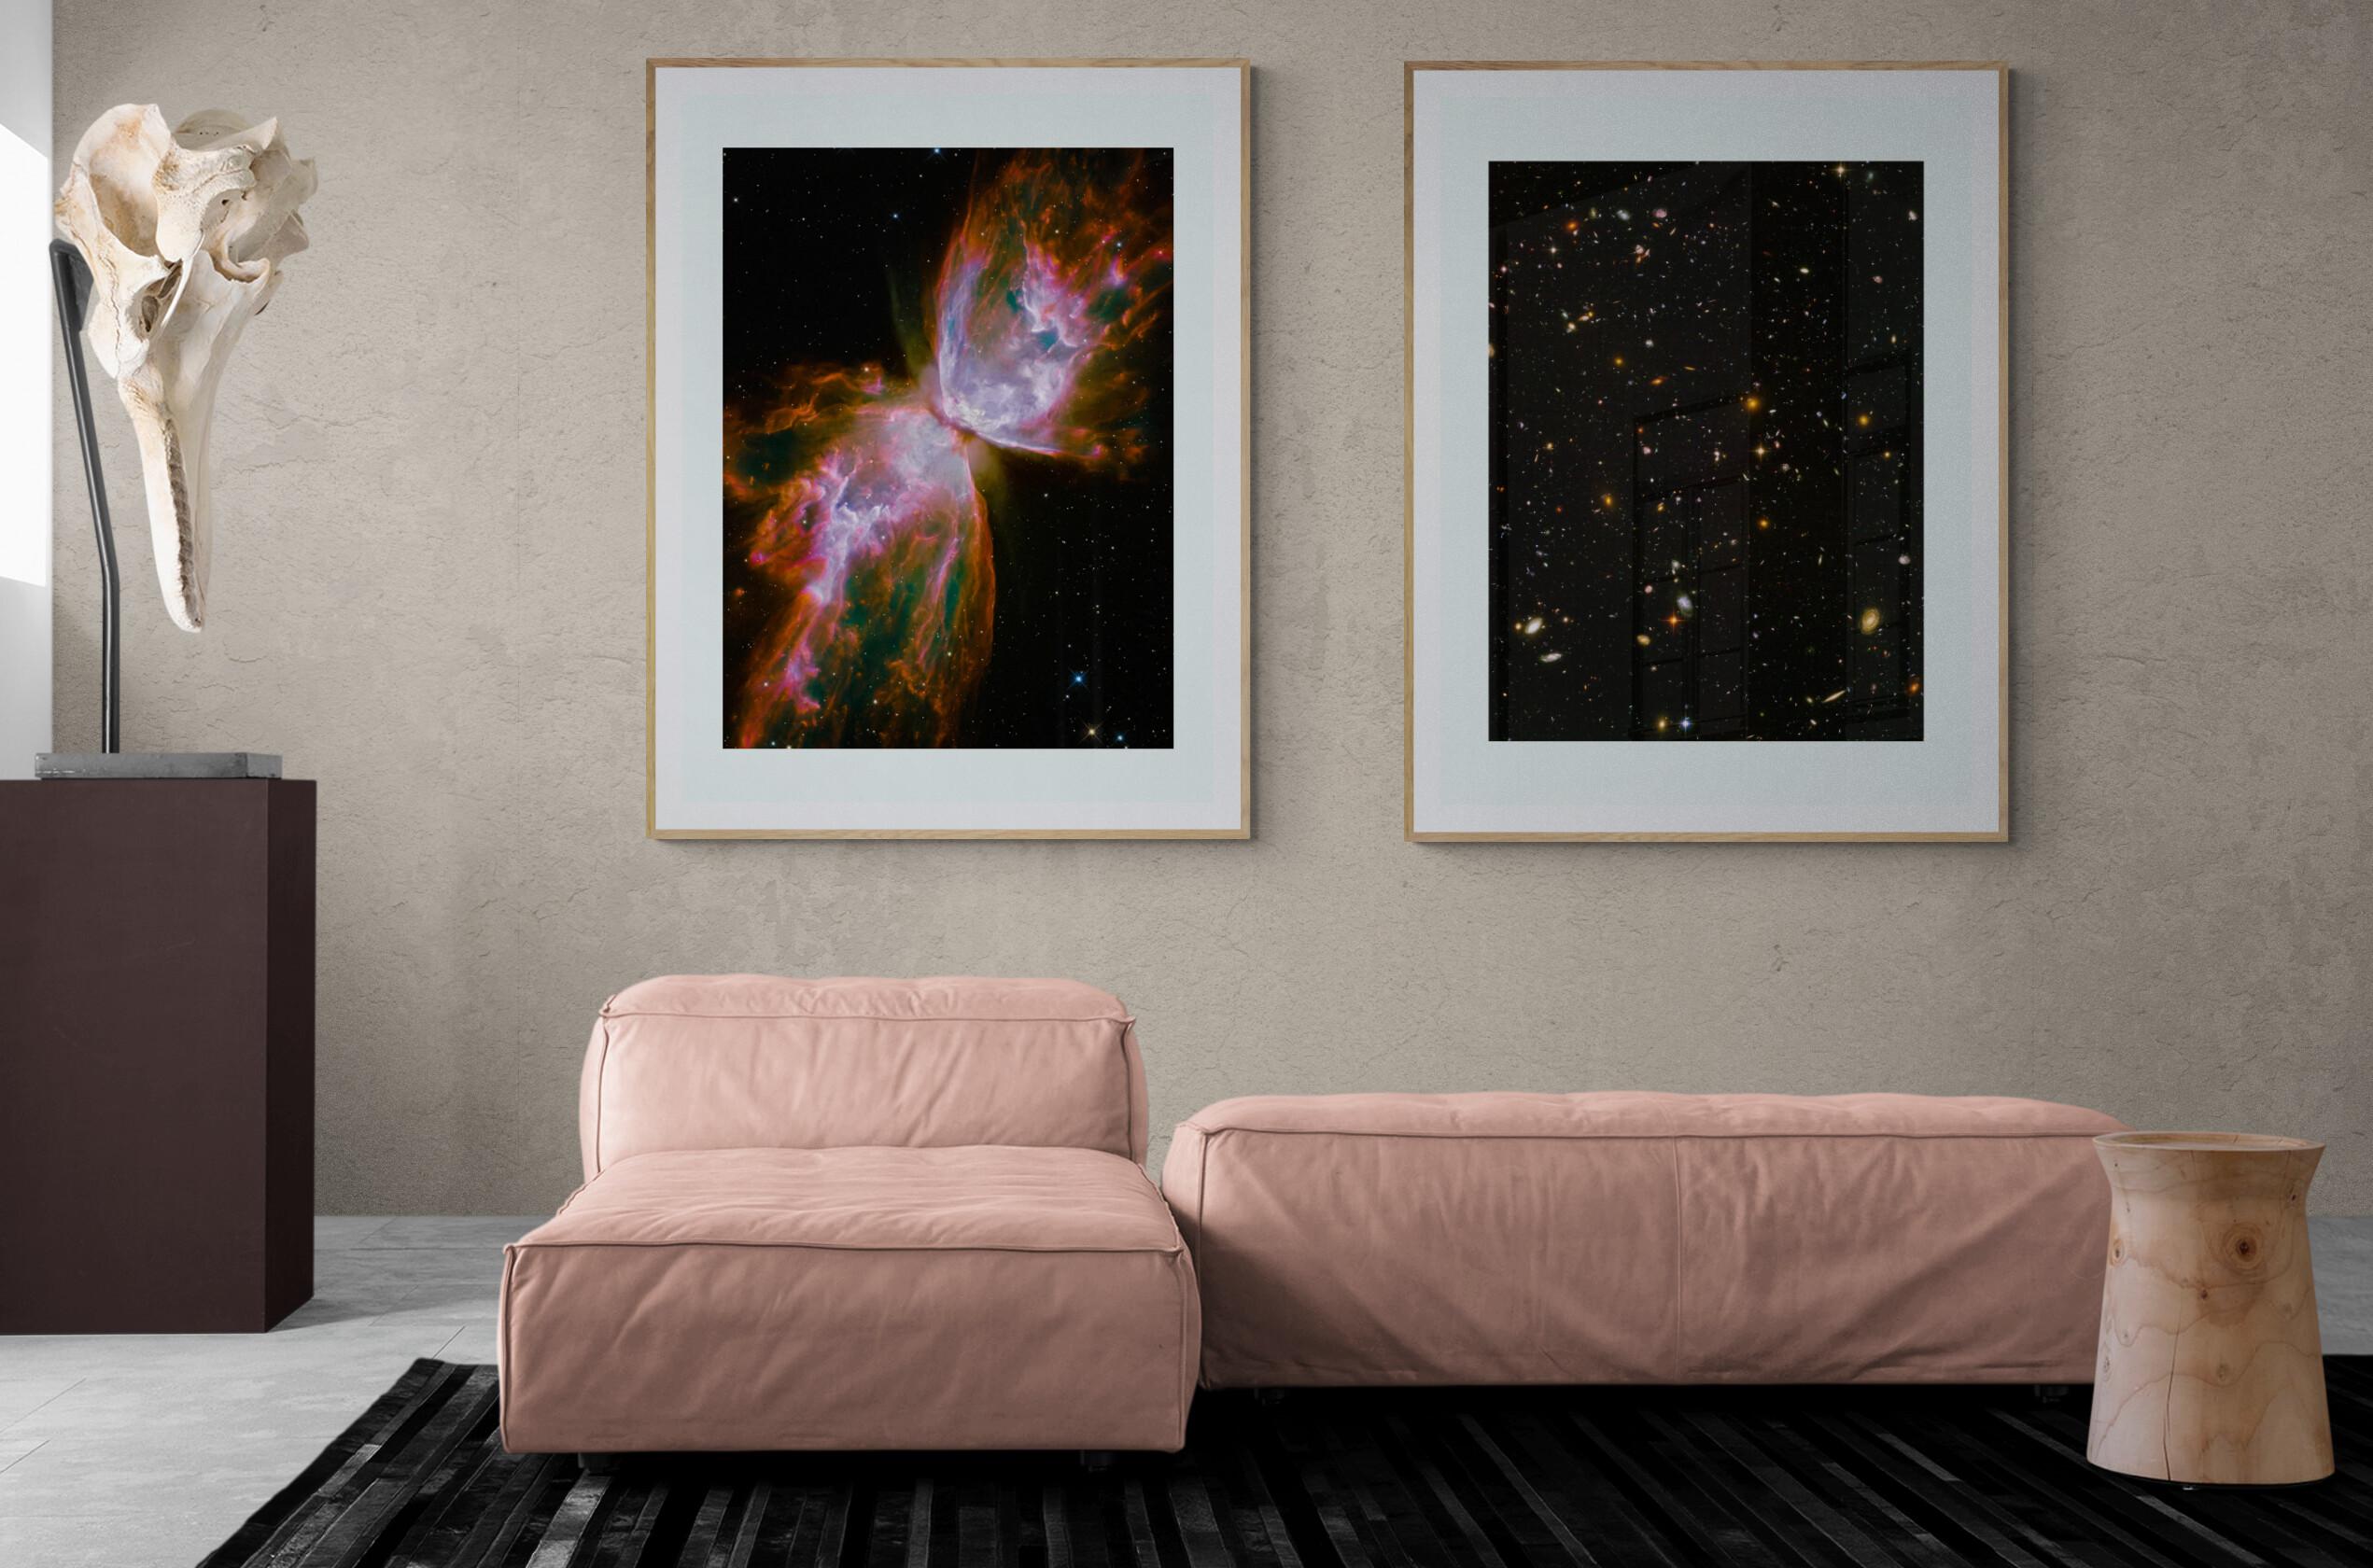  Original museum grade exhibition prints on acid-free poster paper.
This image can be hung horizontal or verticle.

Embedded in this Hubble Space Telescope image of nearby and distant galaxies are 18 young galaxies or galactic building blocks, each